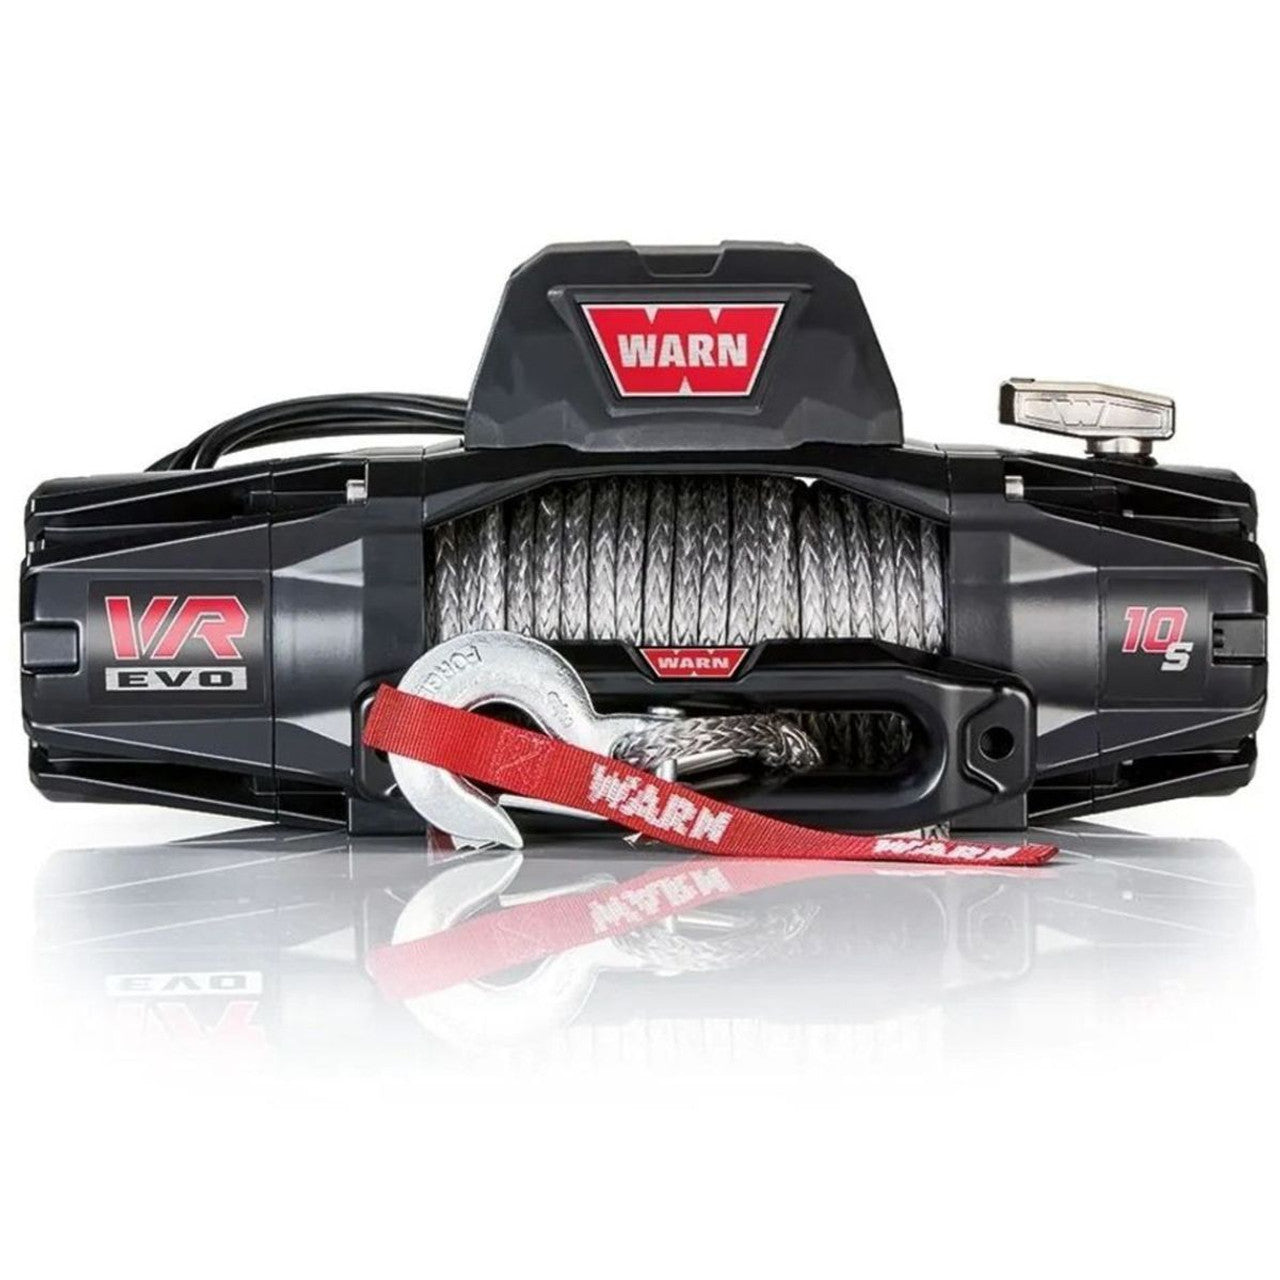 WARN VR EVO 10-S 10,000lbs 12V Winch - Synthetic Rope